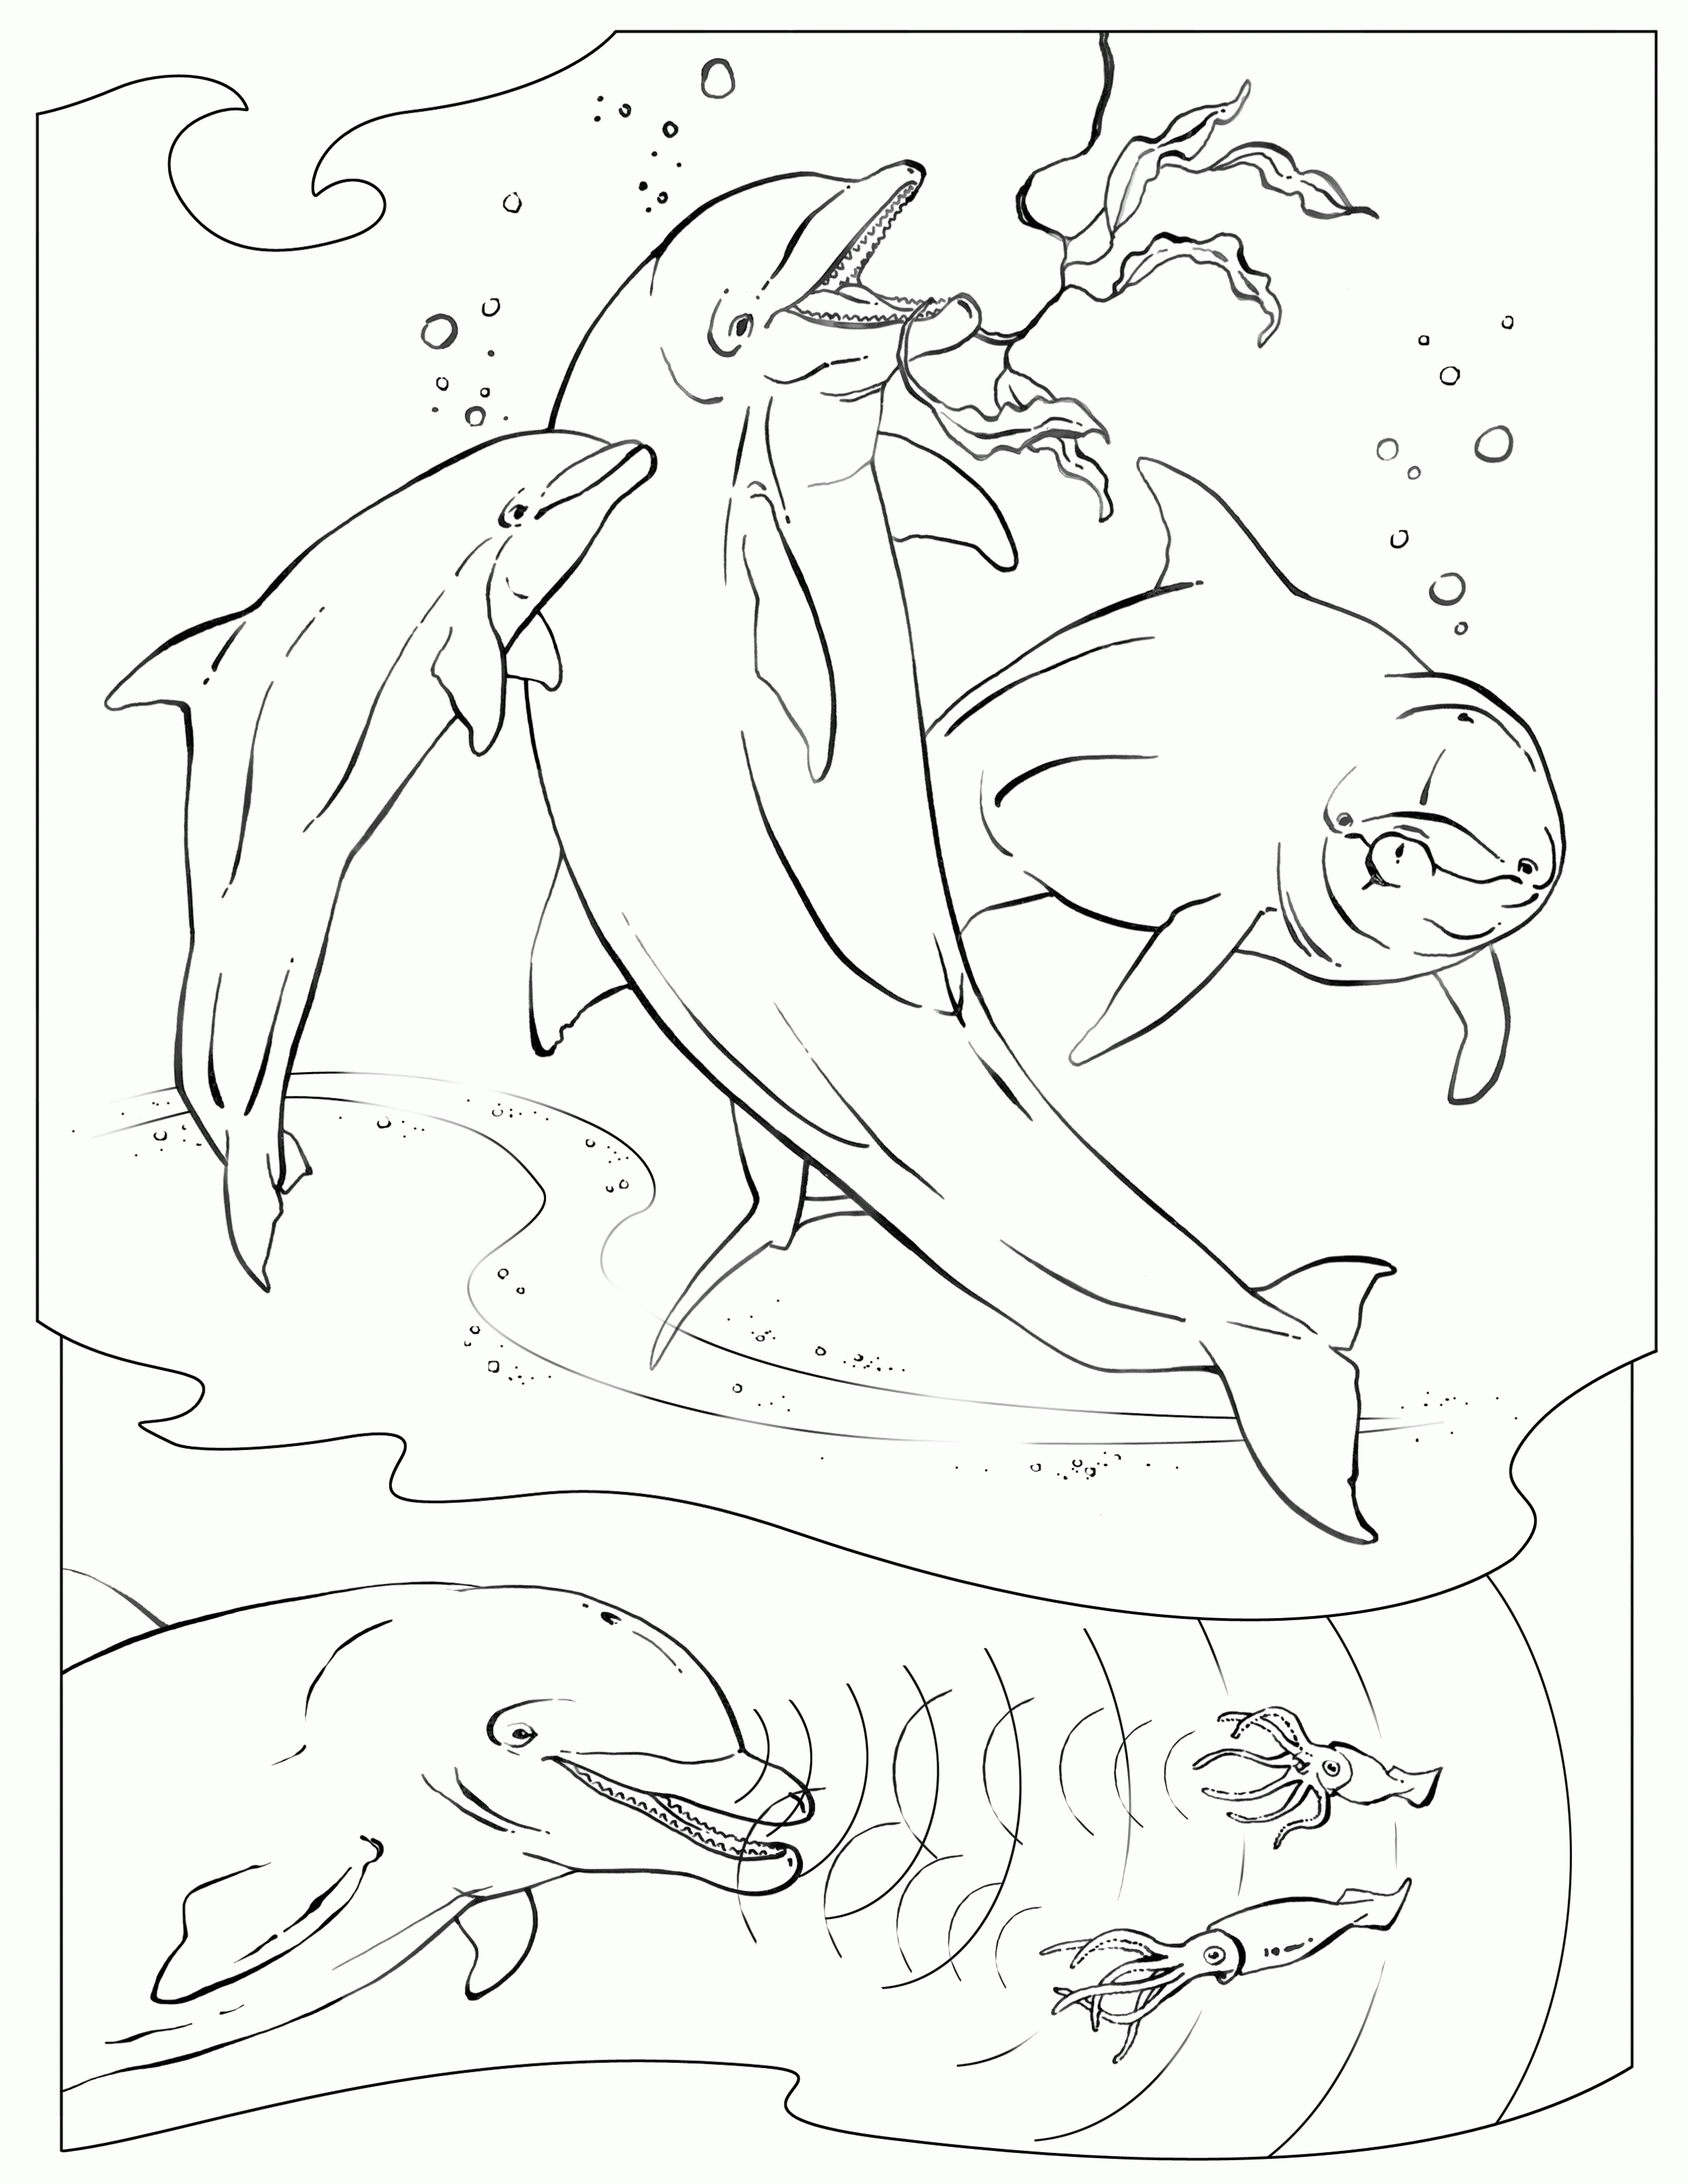 Island Of The Blue Dolphins - Coloring Pages for Kids and for Adults